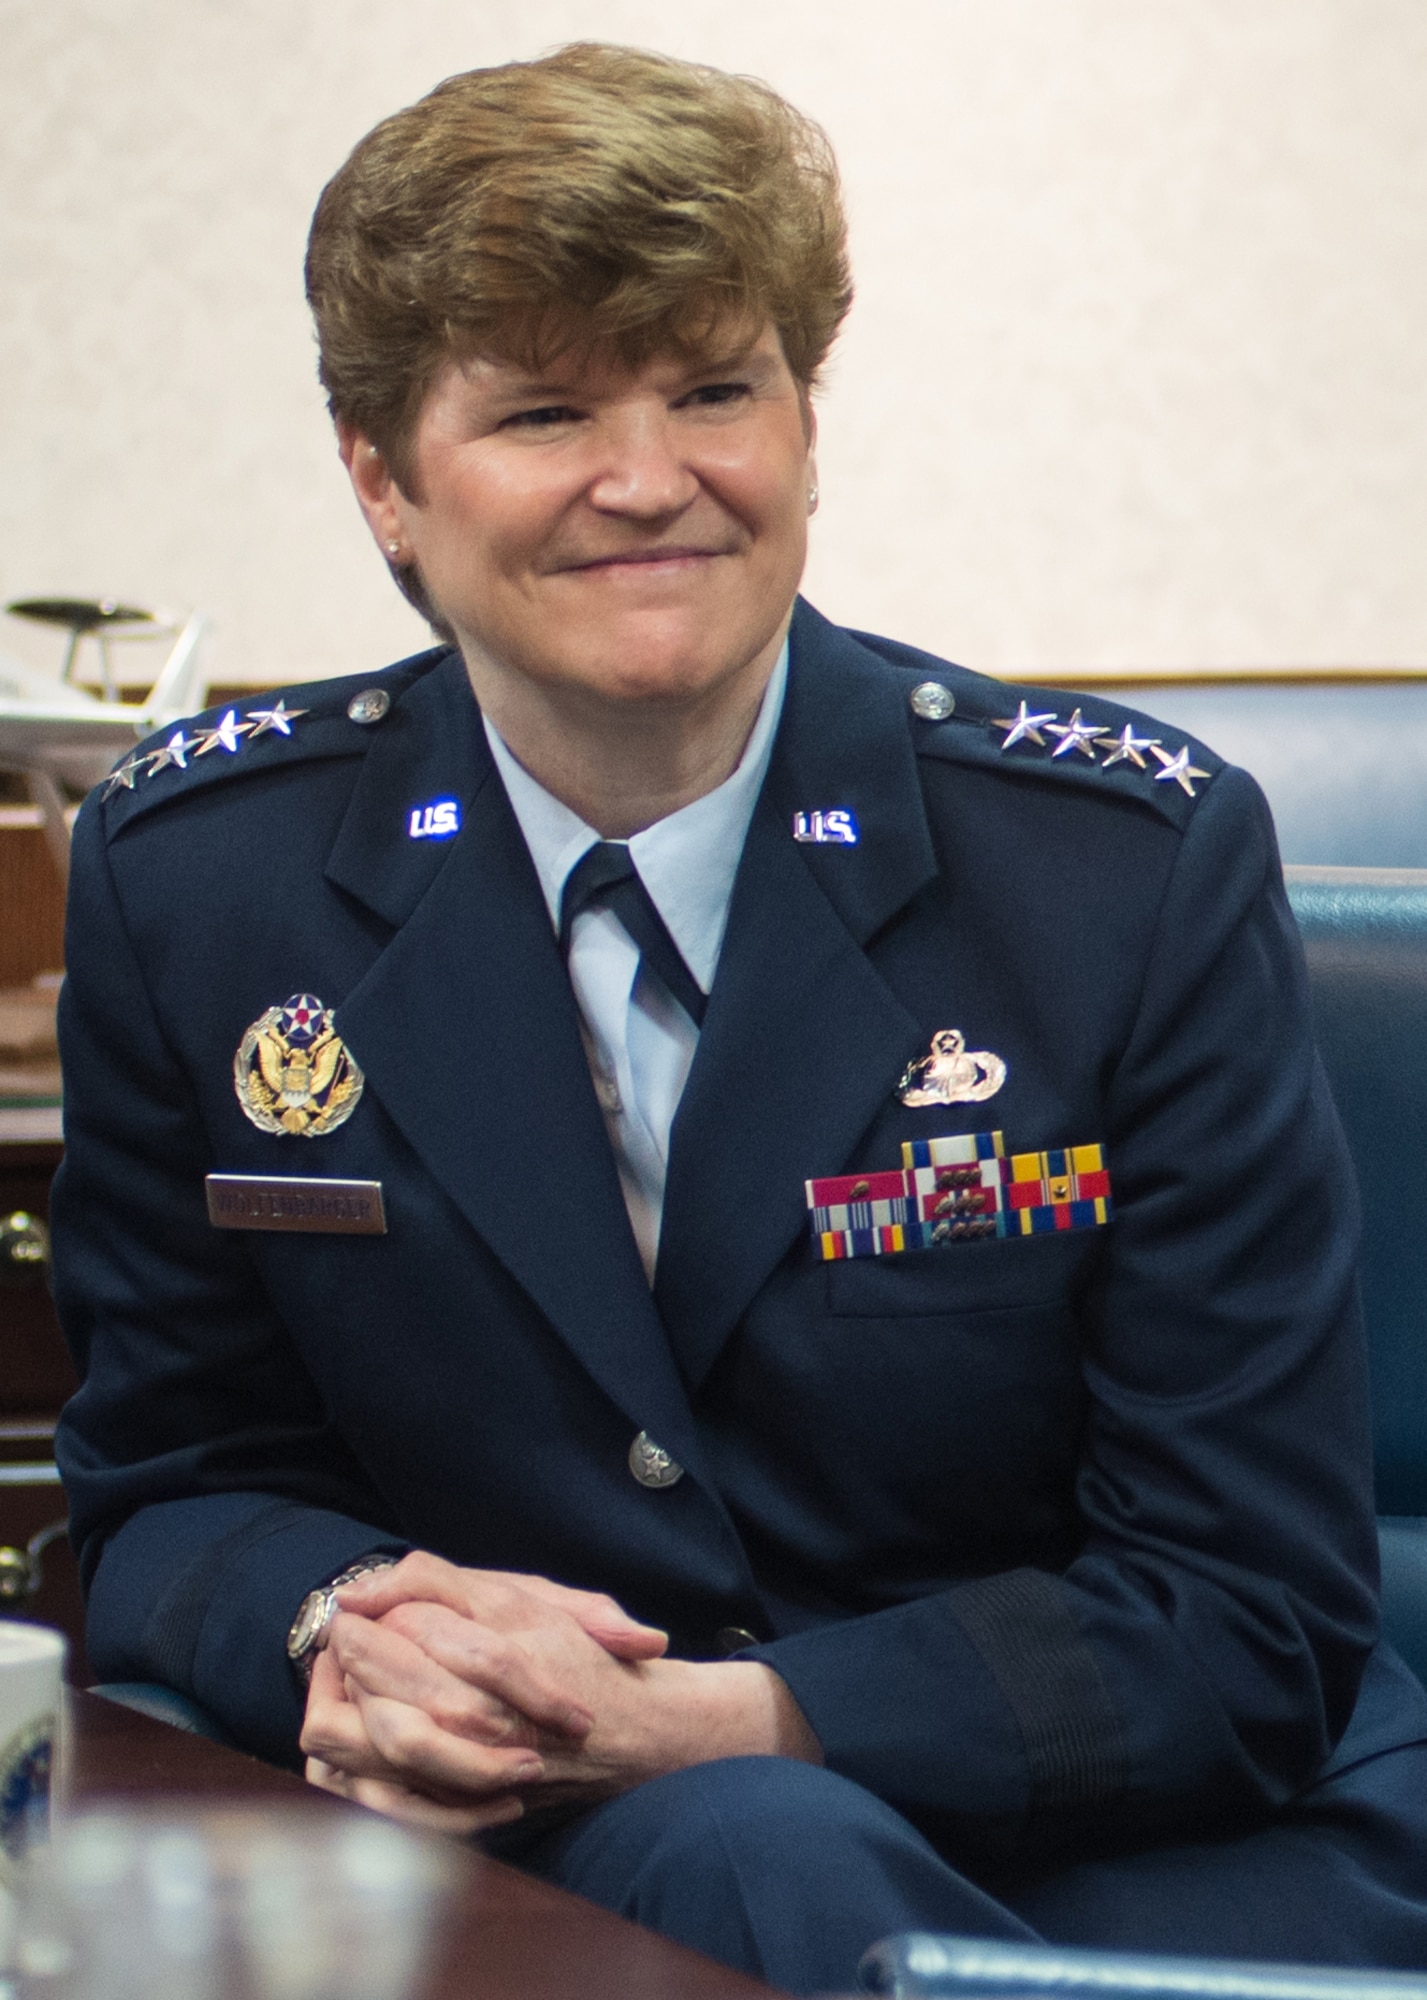 Gen. Janet Wolfenbarger will relinquish command of Air Force Materiel Command and retire following a ceremony on June 8, 2015. Wolfenbarger's 35-year career has included several notable "firsts," including being a part of the first class of female cadets at the U.S. Air Force Academy in 1976 and becoming the first female four-star general in the Air Force in 2012. (U.S. Air Force file photo)
